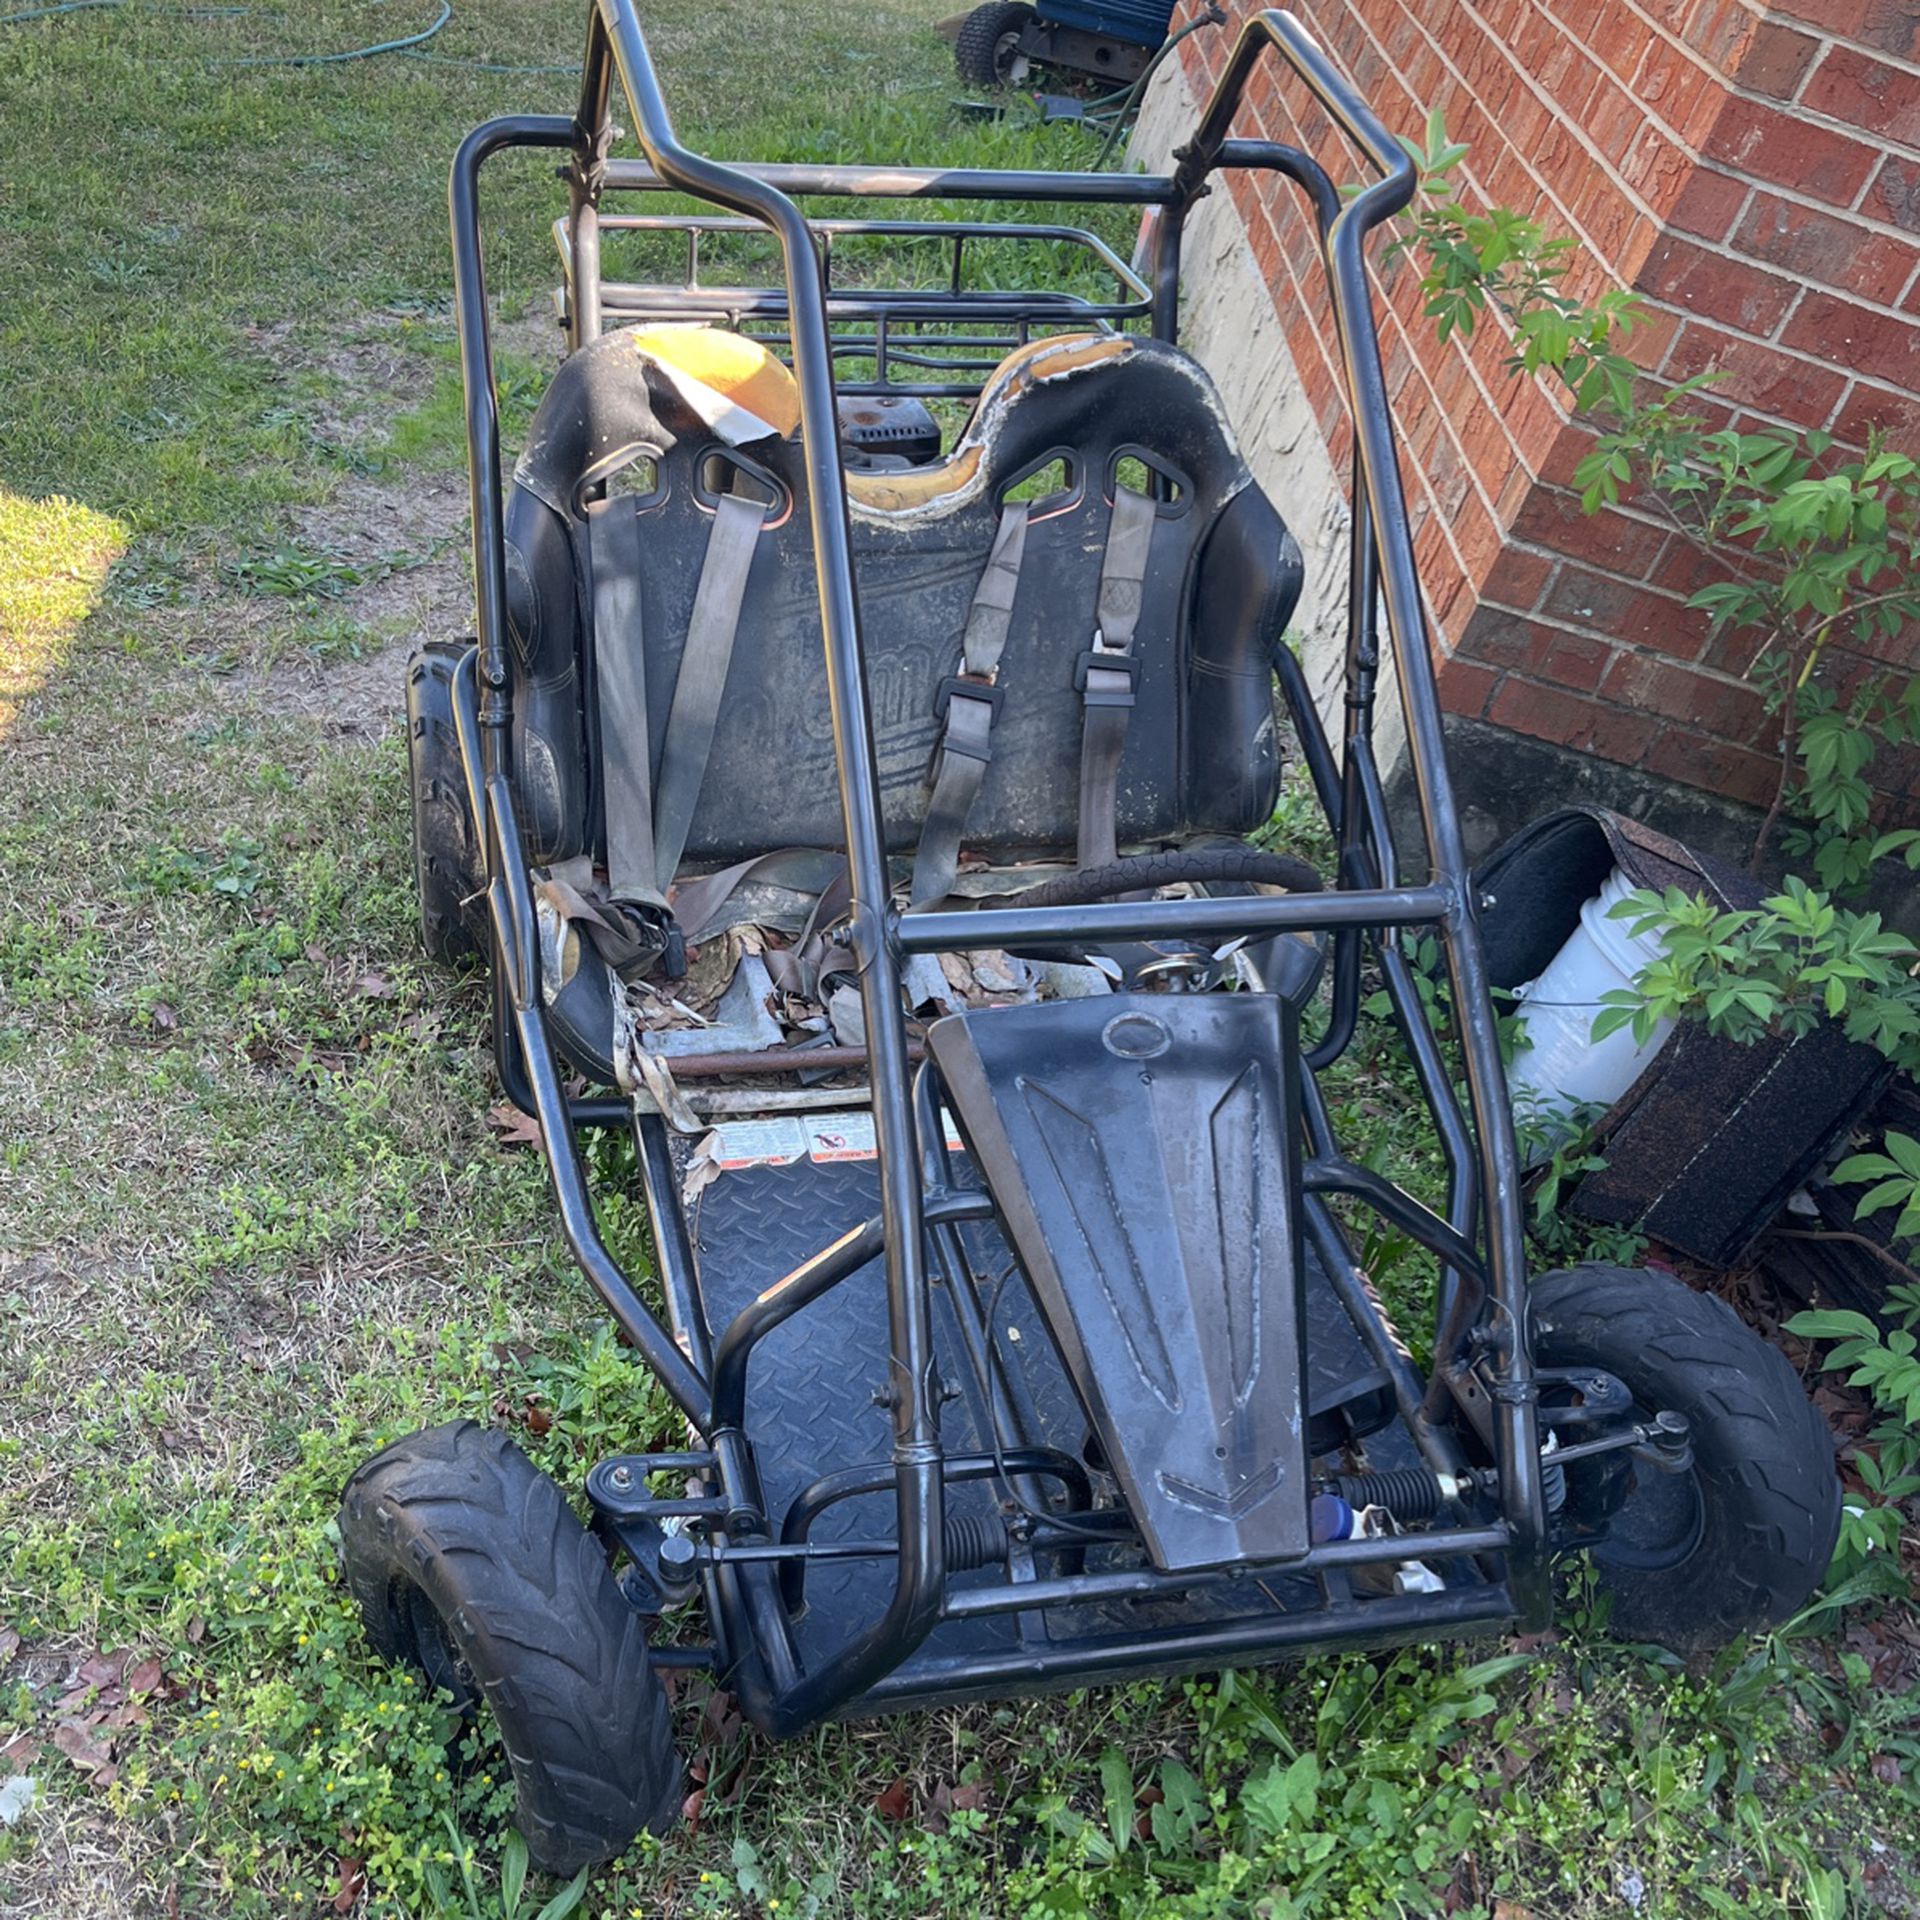 Go Kart $250 As Is Use To Run Been Sitting Down For 2 Years